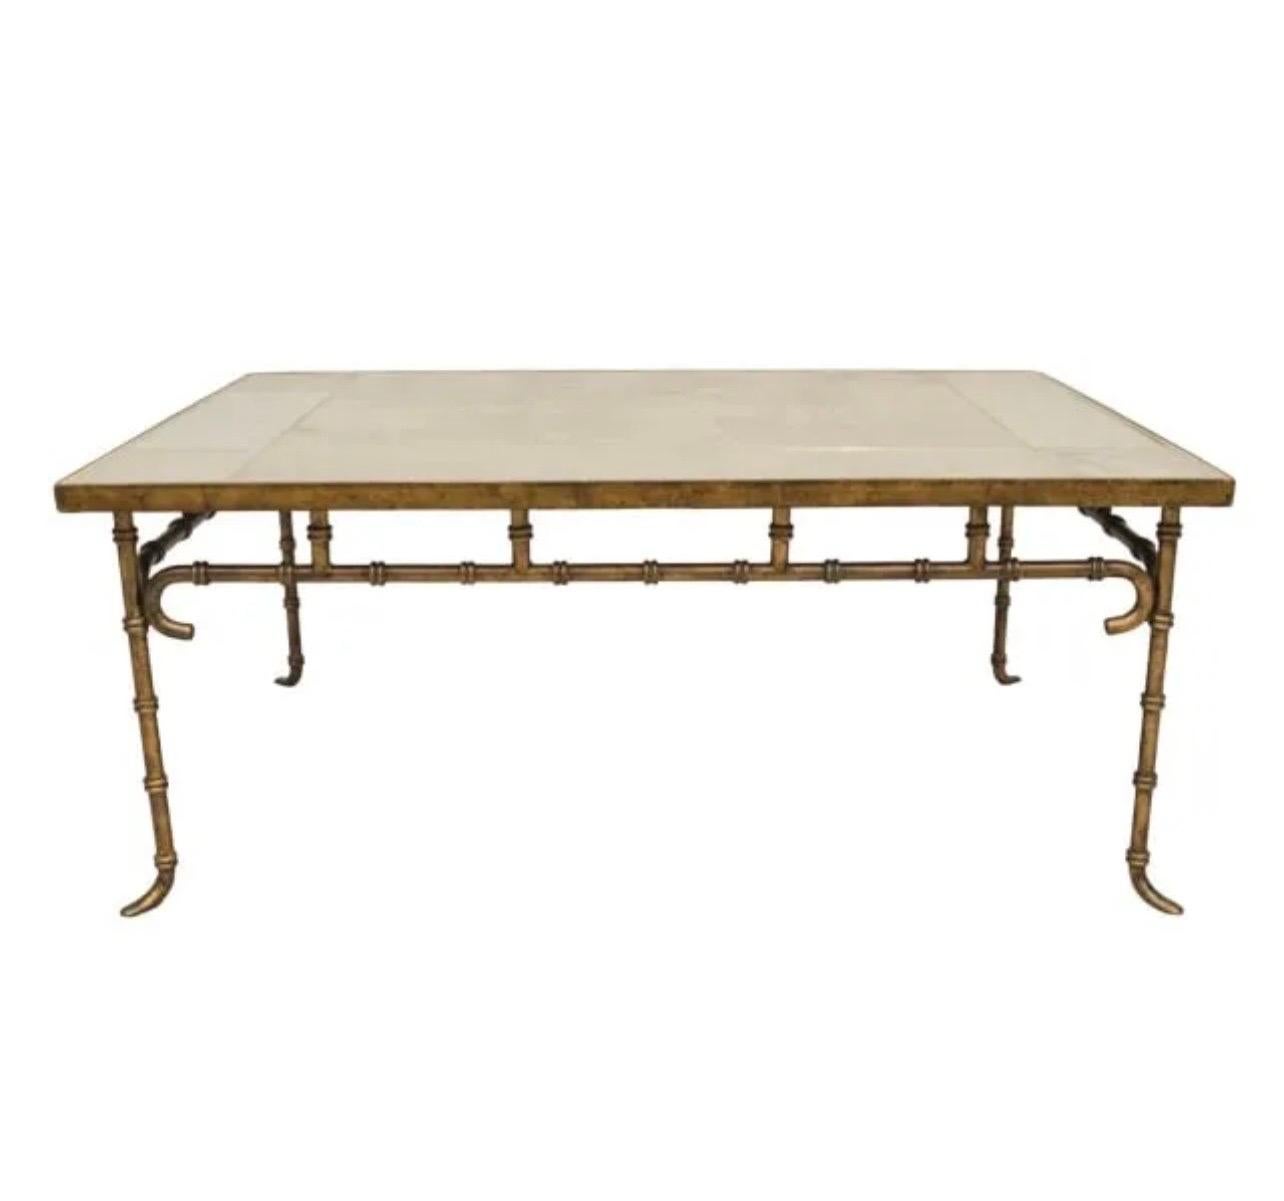 A Wonderful Italian Mid Century Modern Gold Gilt Faux Bamboo With A Panel Antique Mirror Top Coffee / Cocktail Table